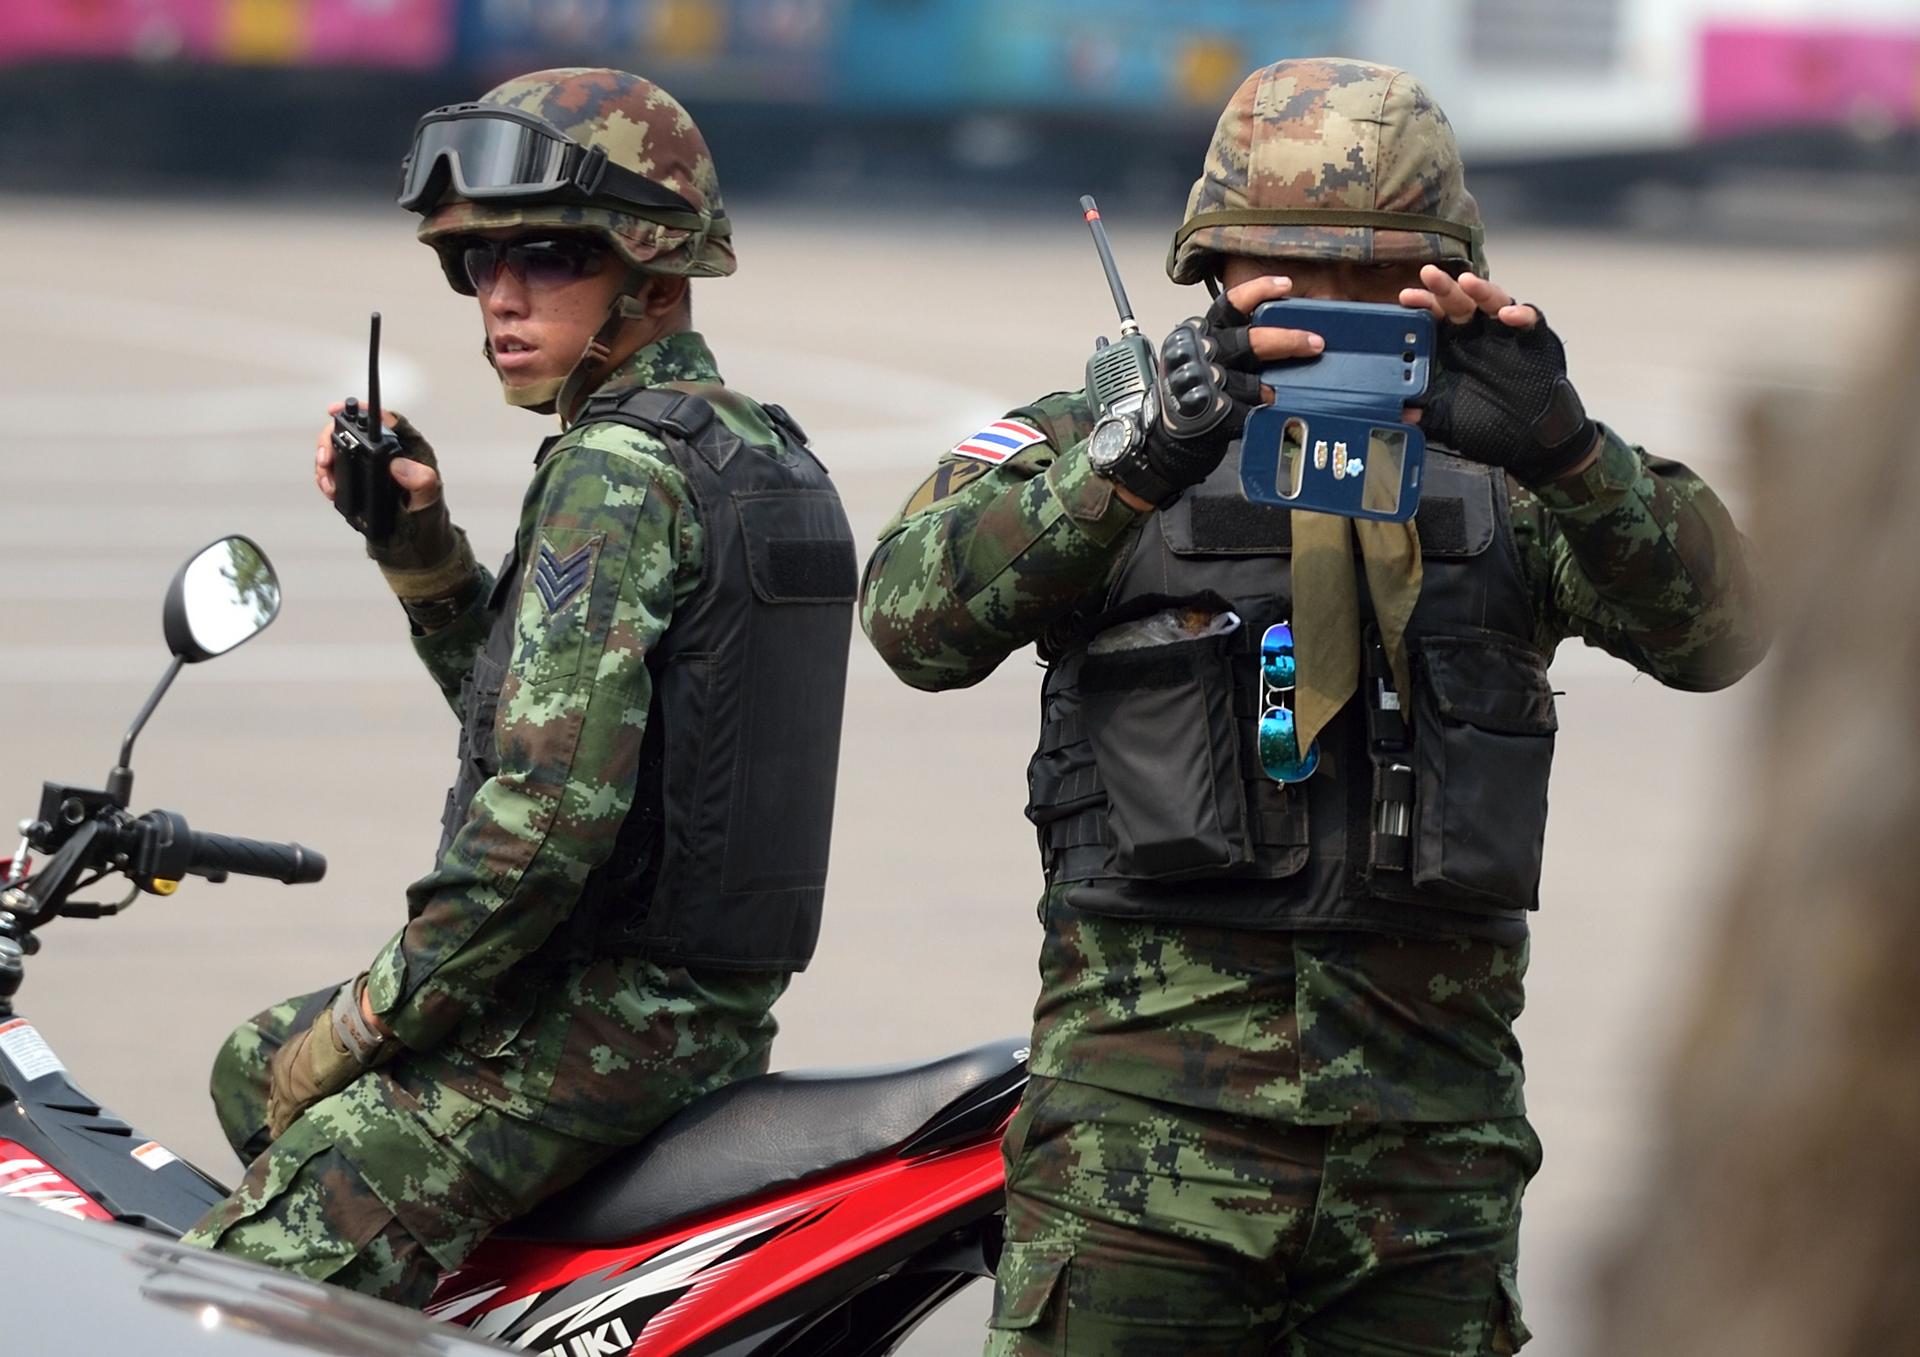 A Thai soldier takes pictures of members of the media, who are feeling more threatened by laws aimed at restricting their work. Photo: AFP